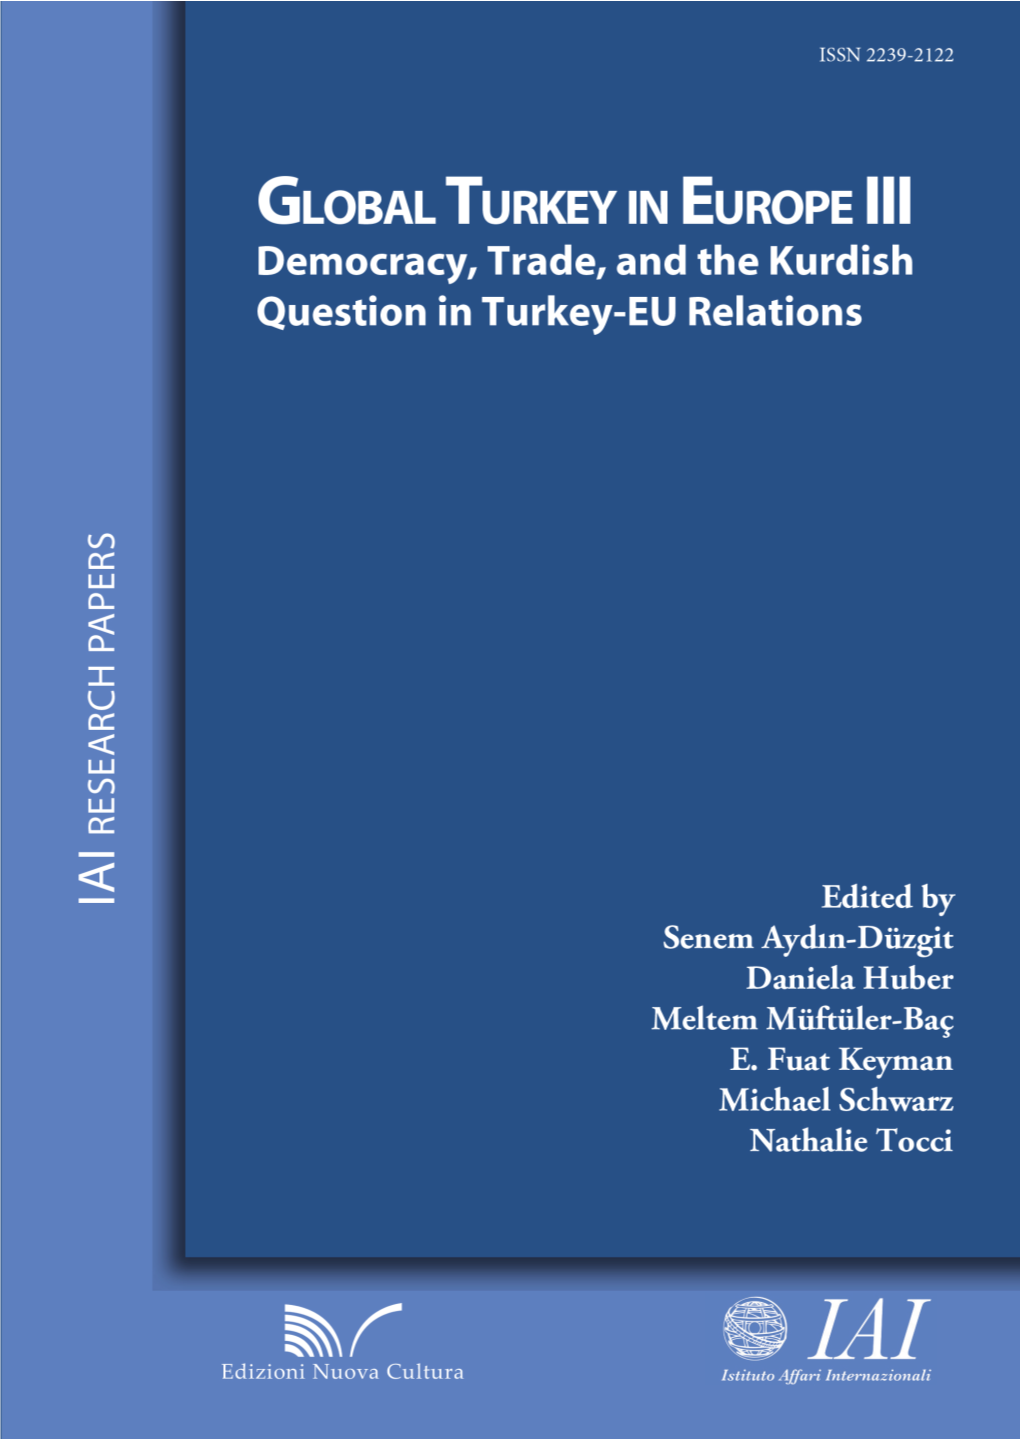 Democracy, Trade, and the Kurdish Question in Turkey-EU Relations